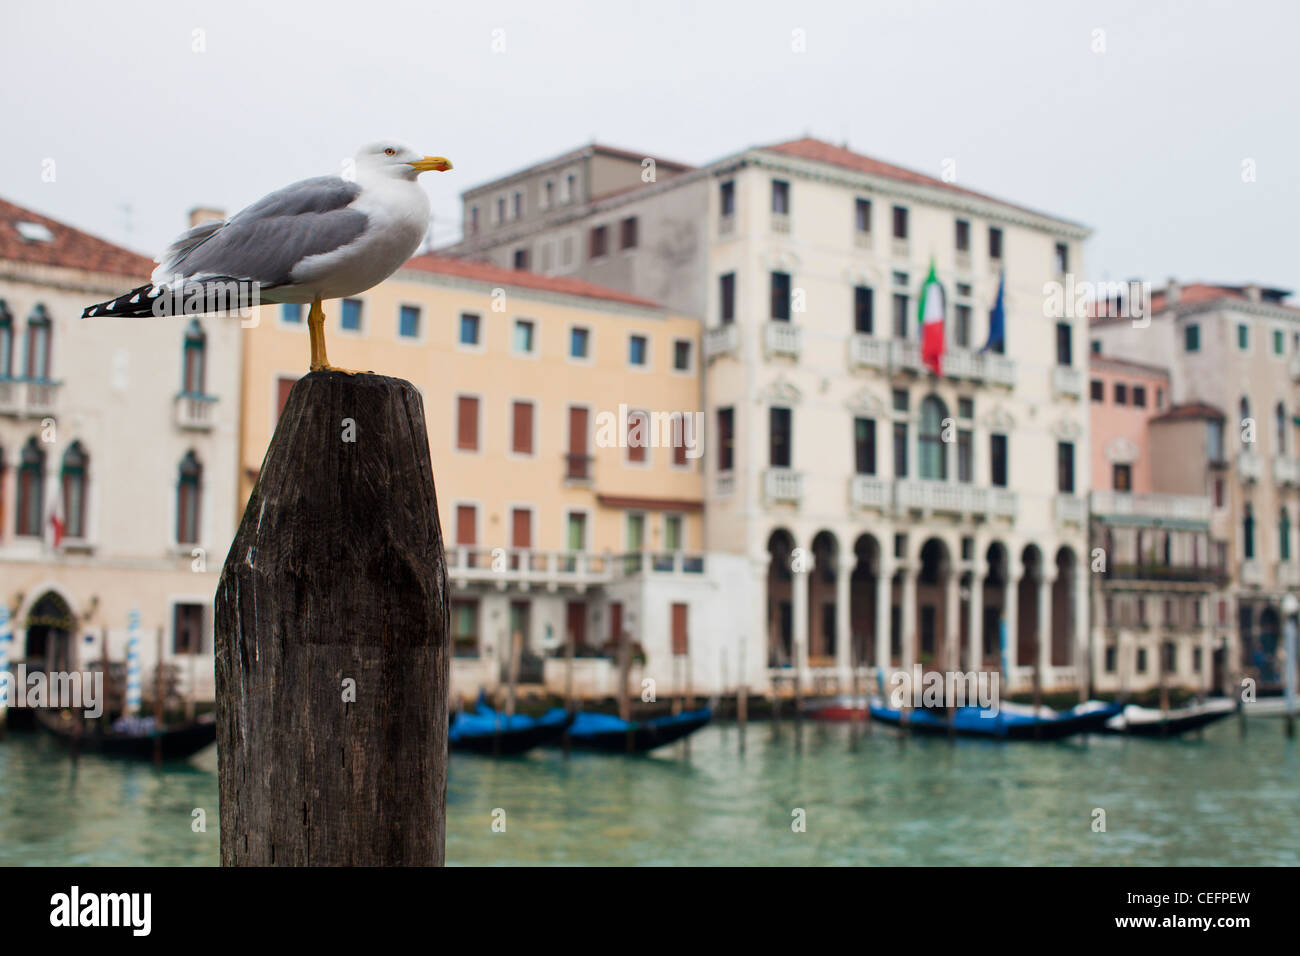 A sea gull uses to mooring post to survey the Grand Canal. Venice, Italy. Stock Photo